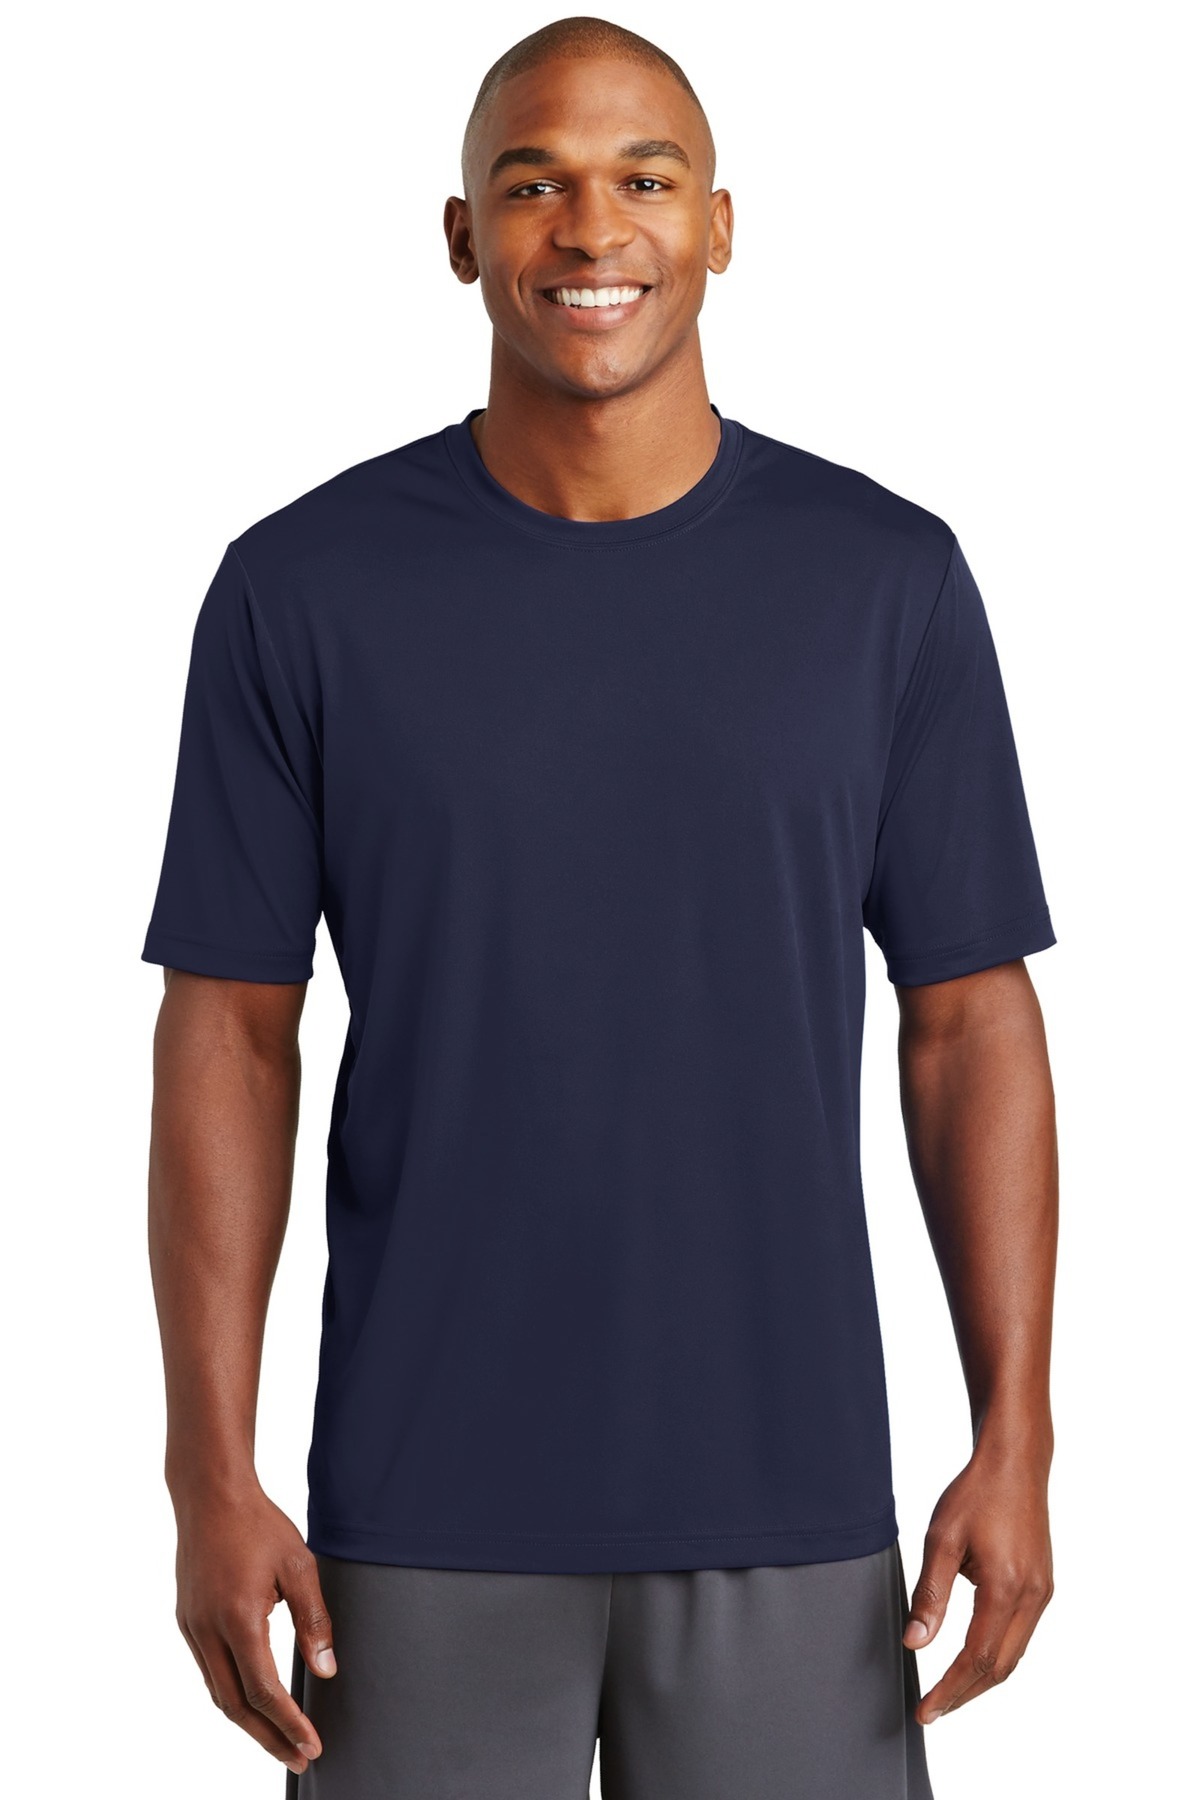 Sport-Tek Embroidered Men's PosiCharge Tough Tee | T-Shirts - Queensboro